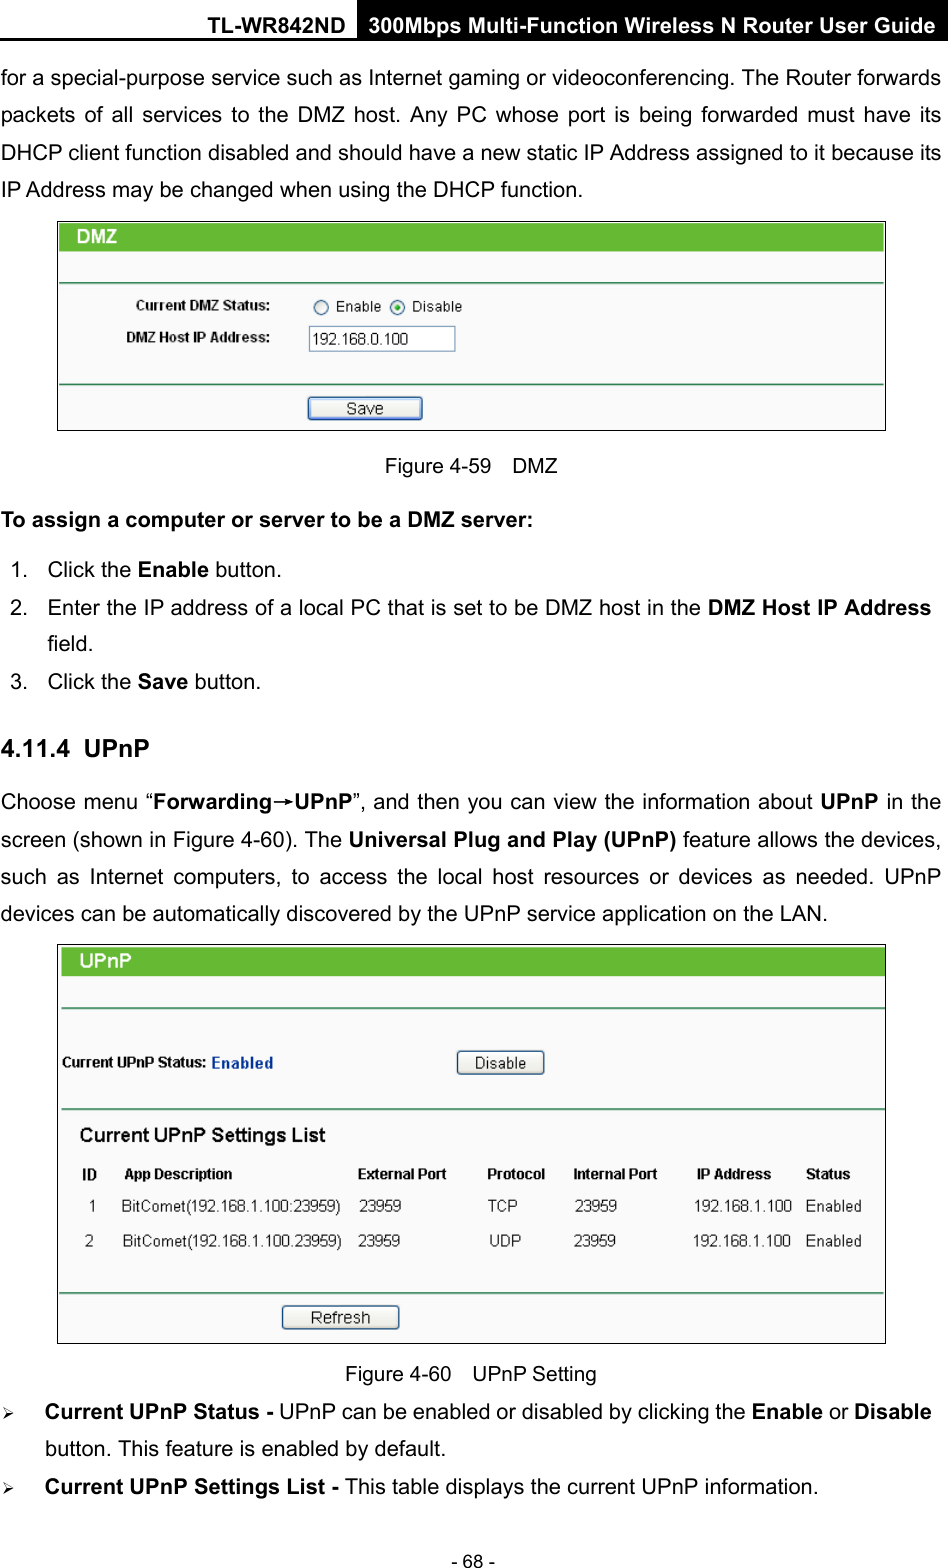 TL-WR842ND 300Mbps Multi-Function Wireless N Router User Guide  - 68 - for a special-purpose service such as Internet gaming or videoconferencing. The Router forwards packets of all services to the DMZ host. Any PC whose port is being forwarded must have its DHCP client function disabled and should have a new static IP Address assigned to it because its IP Address may be changed when using the DHCP function.  Figure 4-59  DMZ To assign a computer or server to be a DMZ server:   1. Click the Enable button.   2. Enter the IP address of a local PC that is set to be DMZ host in the DMZ Host IP Address field.   3. Click the Save button.   4.11.4 UPnP Choose menu “Forwarding→UPnP”, and then you can view the information about UPnP in the screen (shown in Figure 4-60). The Universal Plug and Play (UPnP) feature allows the devices, such as Internet computers, to access the local host resources or devices as needed. UPnP devices can be automatically discovered by the UPnP service application on the LAN.  Figure 4-60  UPnP Setting  Current UPnP Status - UPnP can be enabled or disabled by clicking the Enable or Disable button. This feature is enabled by default.  Current UPnP Settings List - This table displays the current UPnP information. 